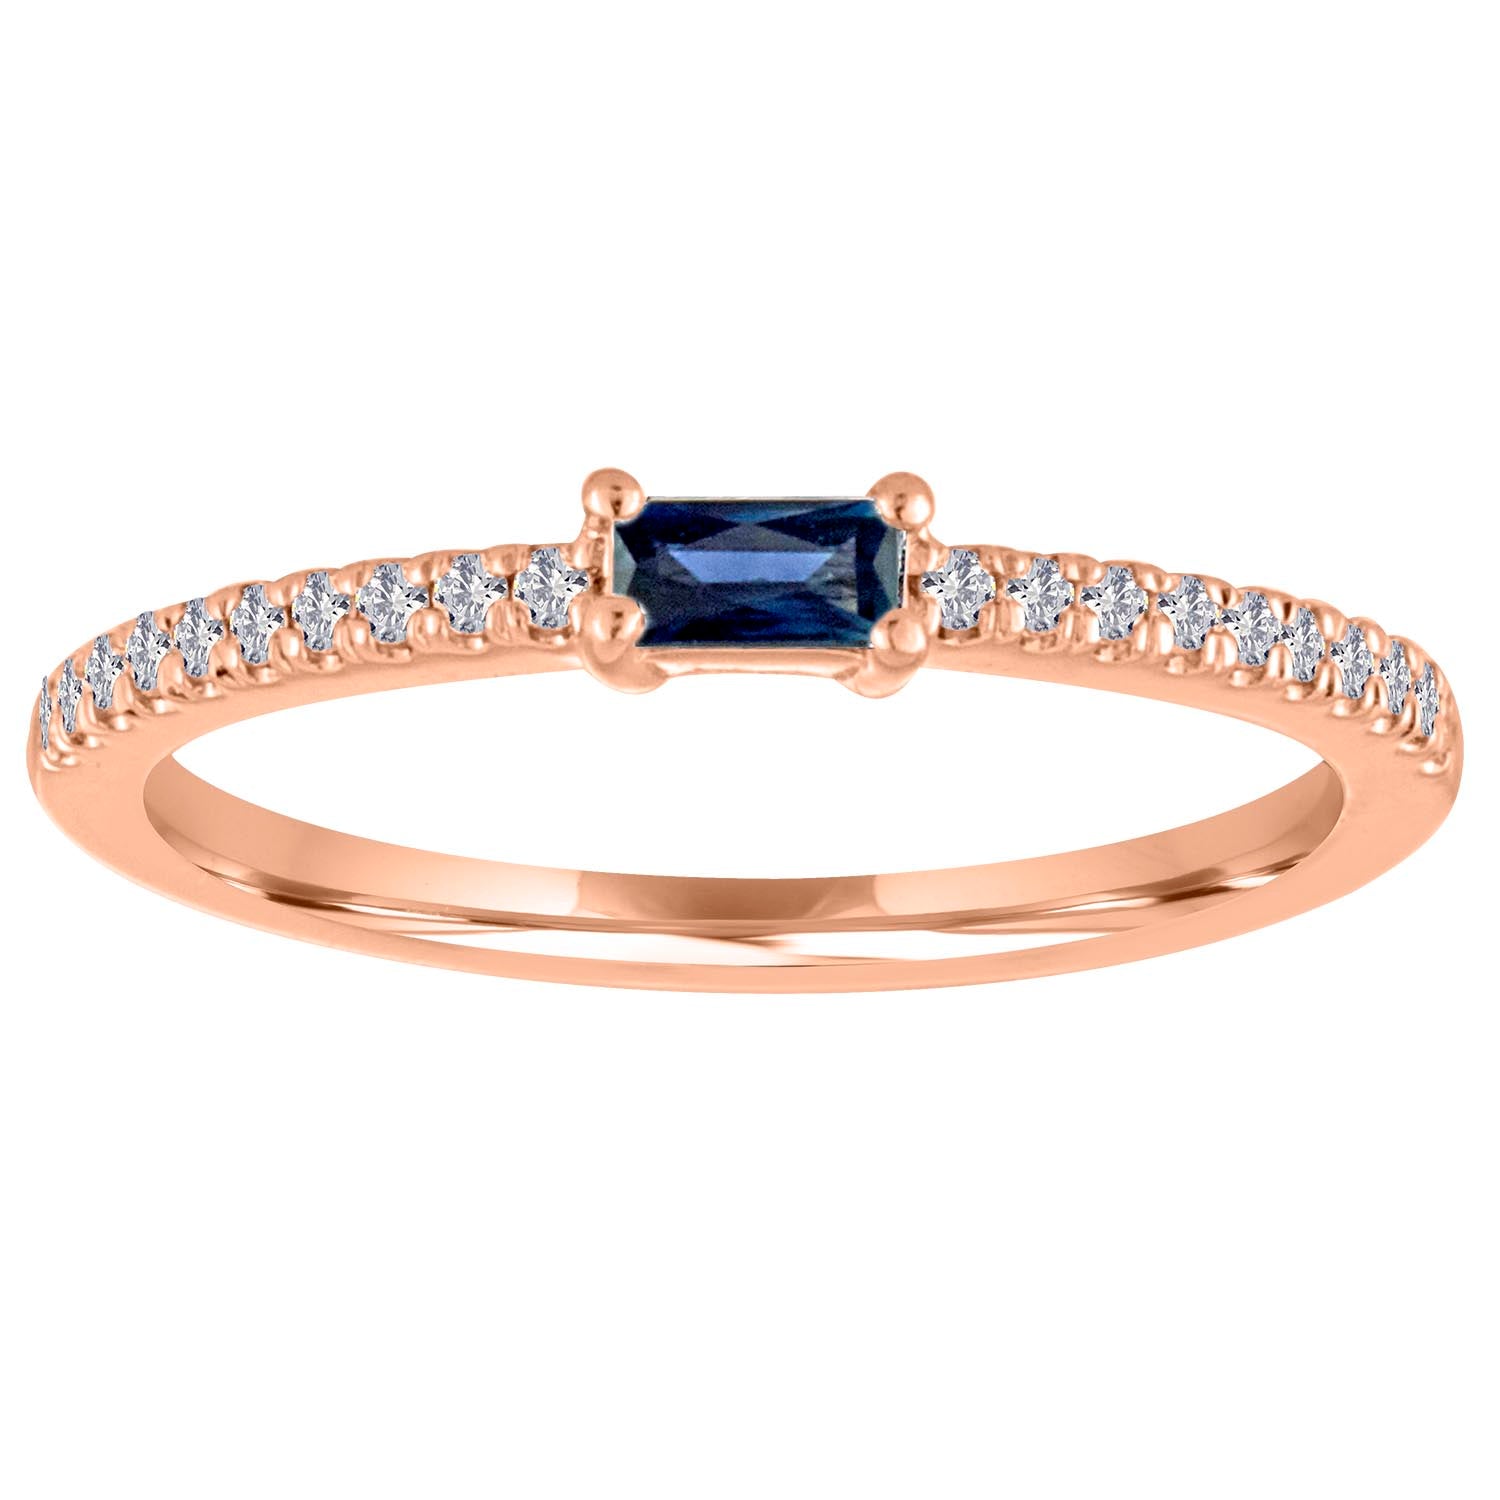 Rose gold skinny band with a sapphire baguette in the center and round diamonds on the shank.